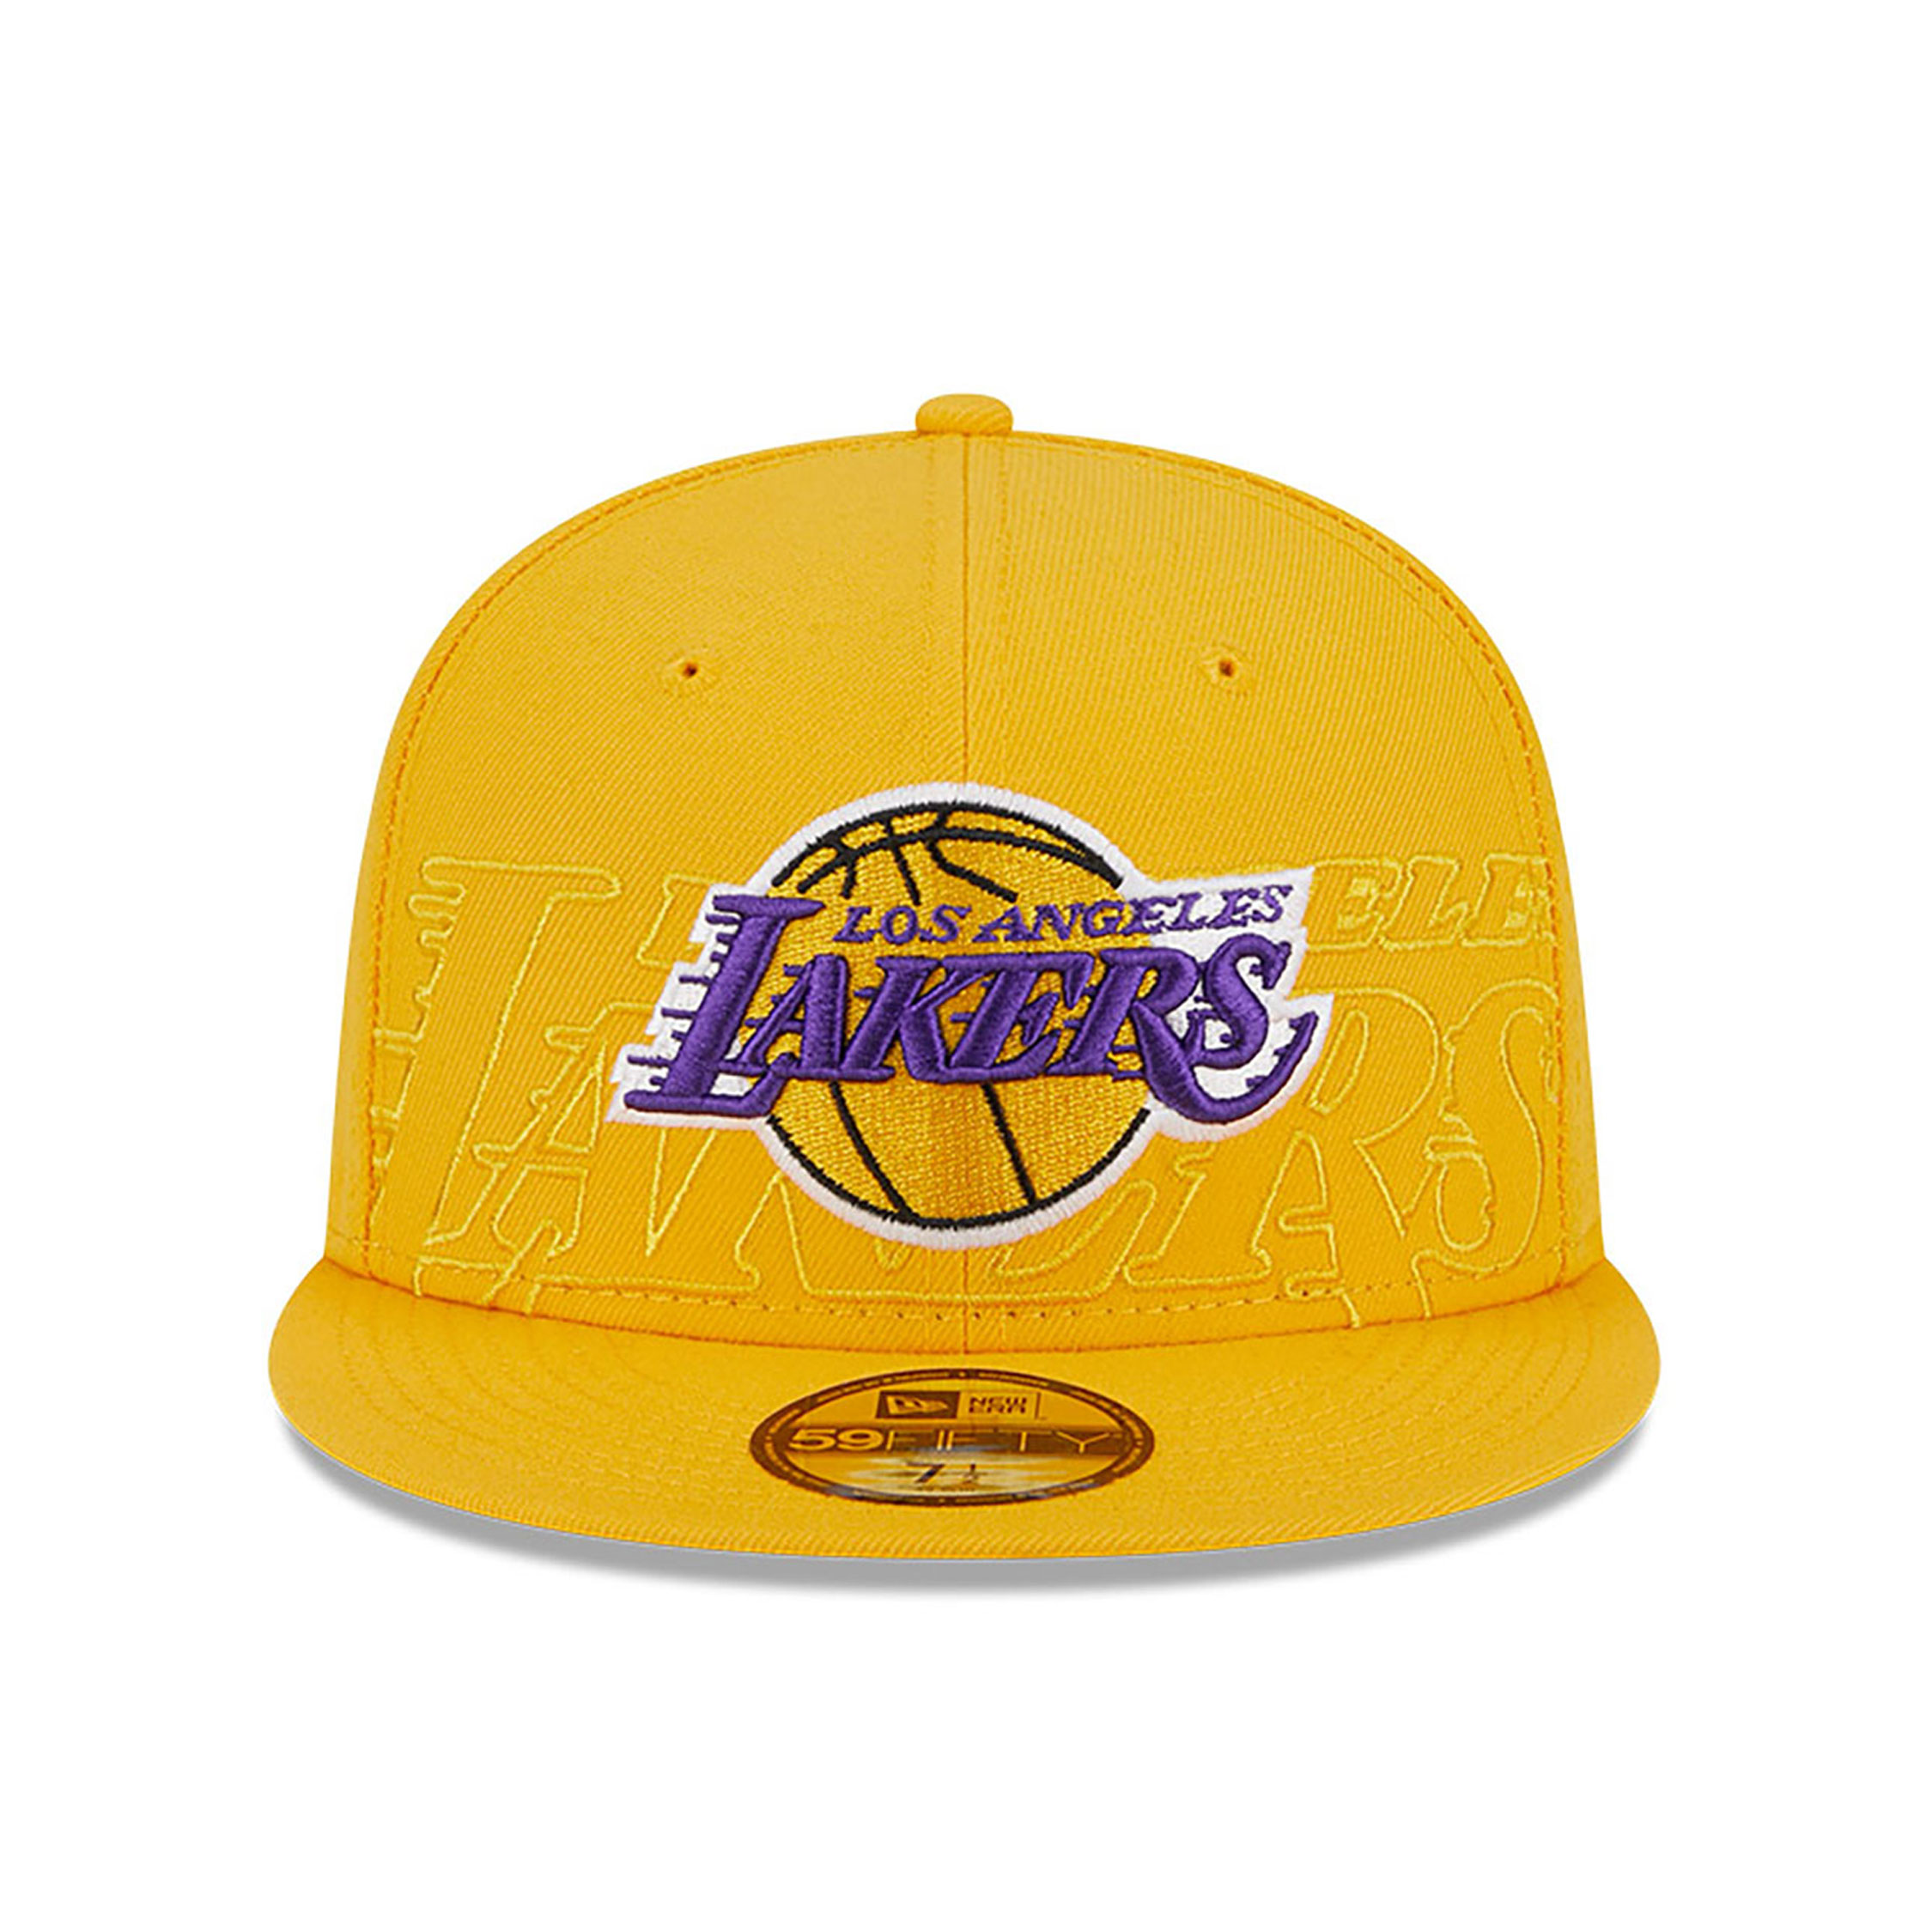 Ovo x NBA Lakers New Era 59FIFTY Fitted Hat Purple